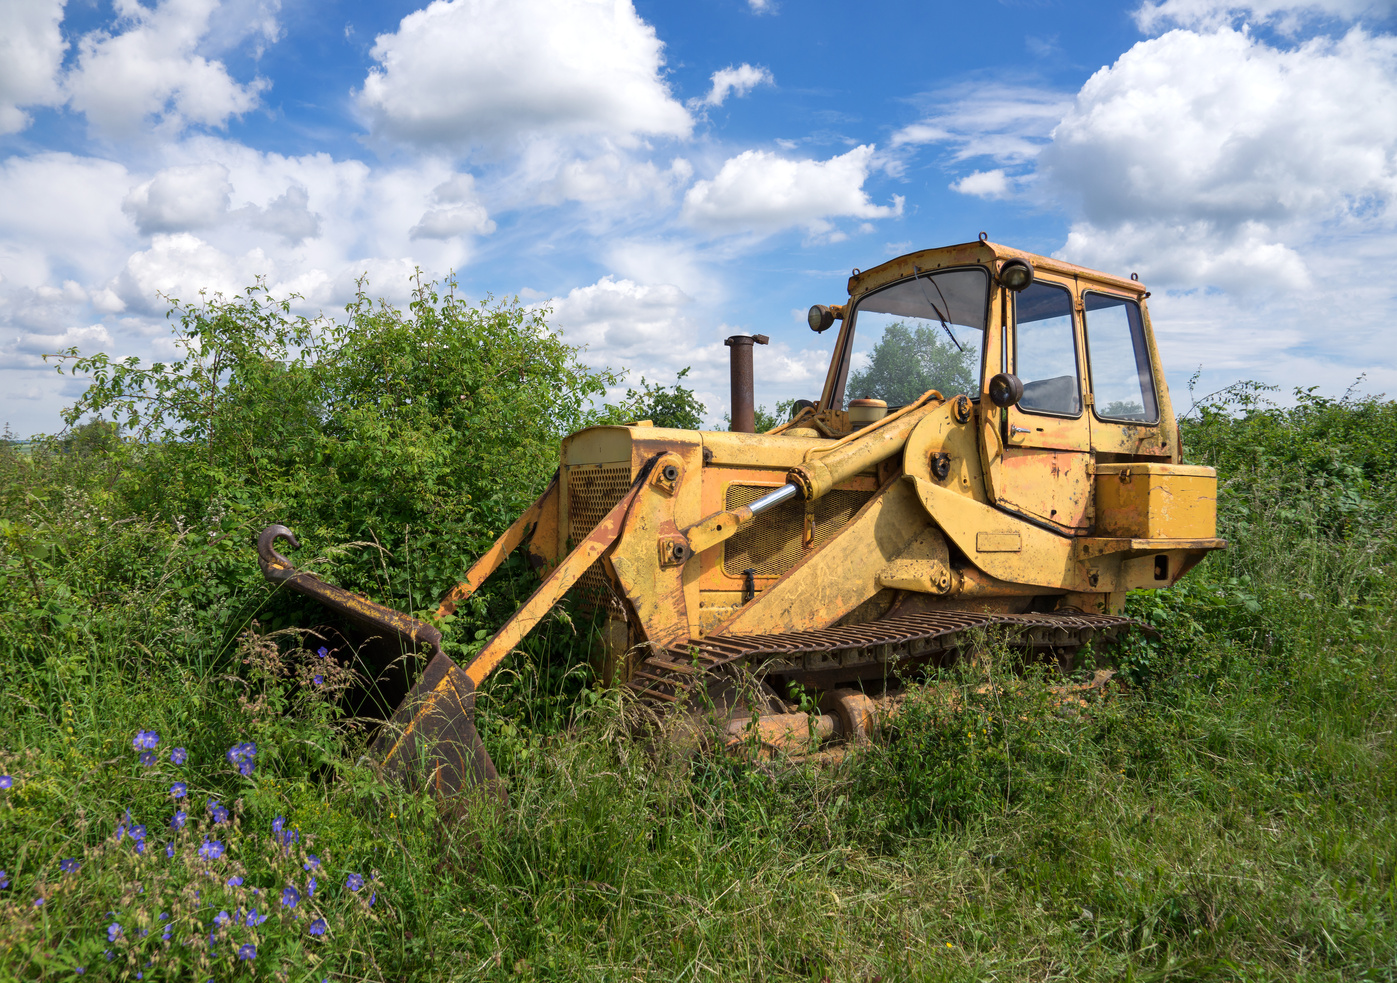 Old rusted bulldozer